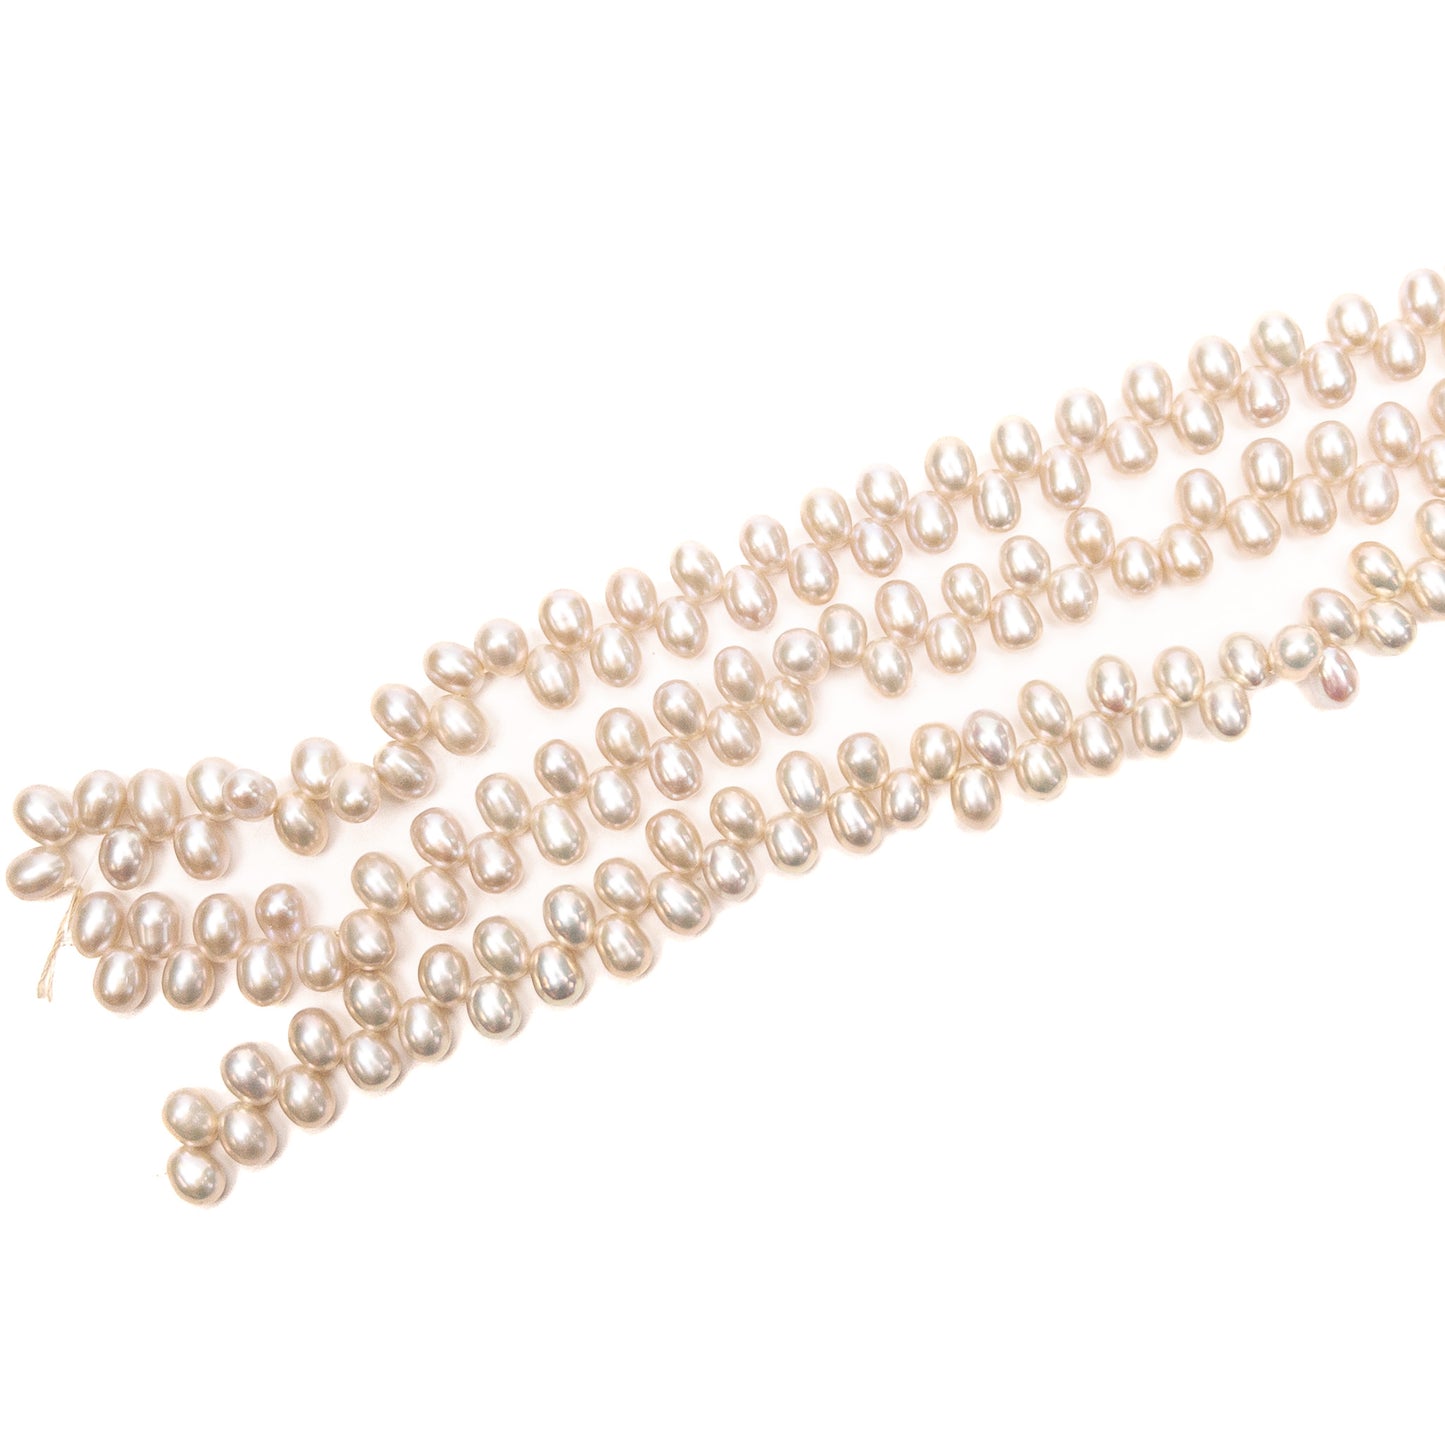 Freshwater Pearl Tip-Drill 8x6mm Grey Bead - 8" Strand